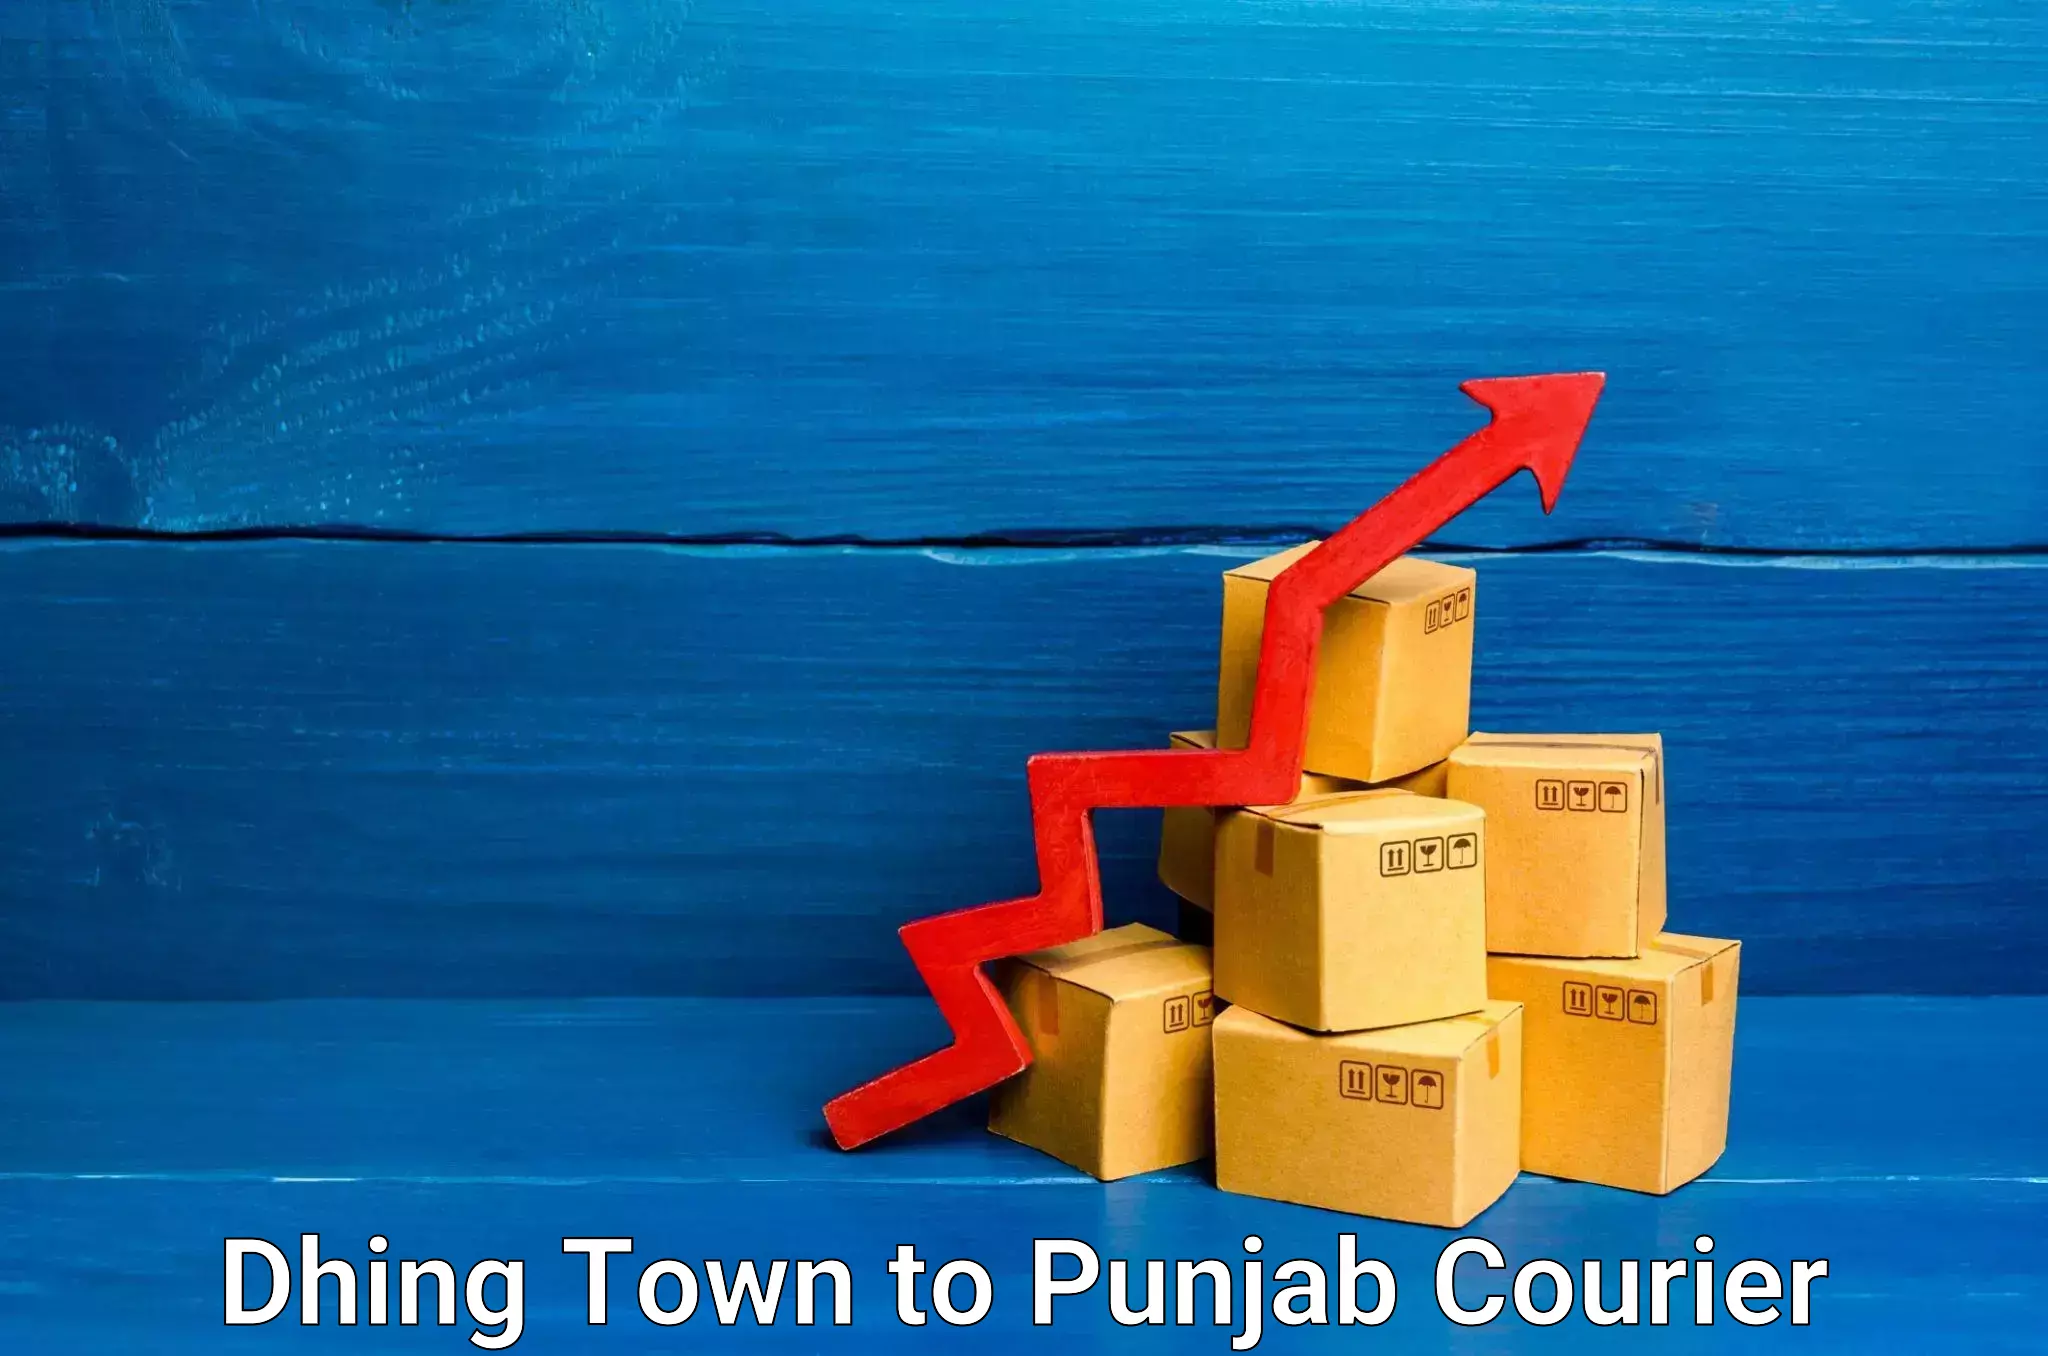 Streamlined delivery processes Dhing Town to Punjab